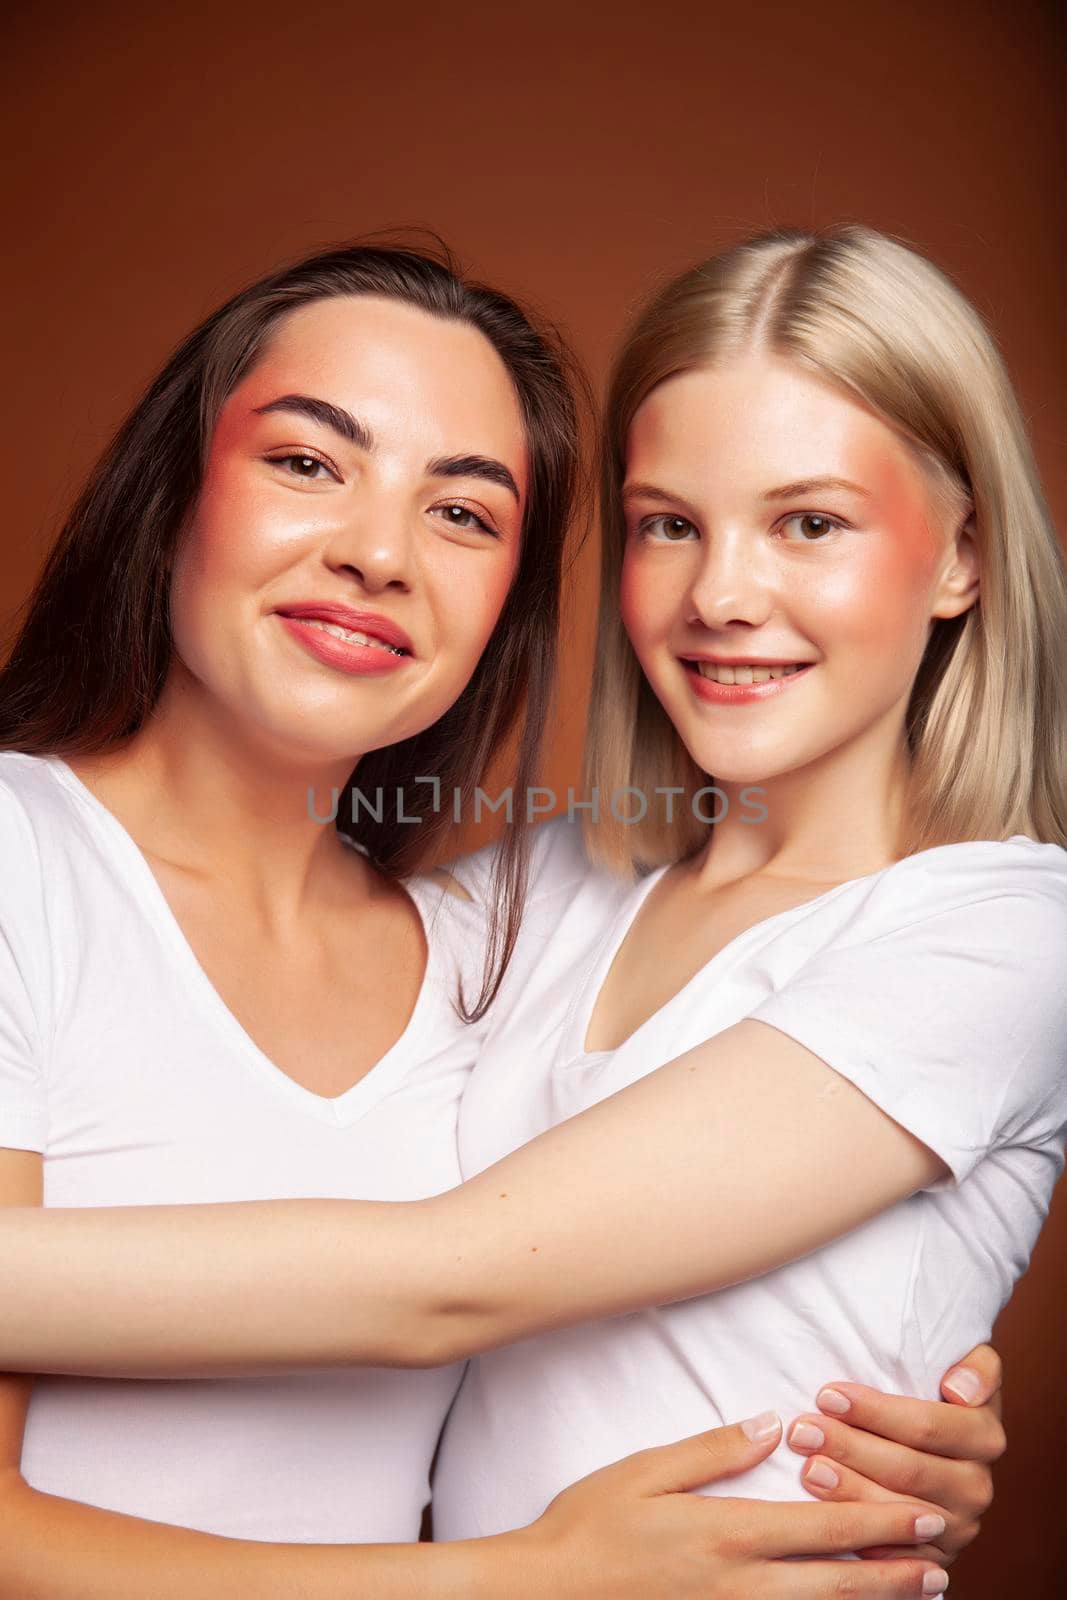 two pretty diverse girls happy posing together: blond and brunette, caucasian and asian on brown background, lifestyle people concept close up